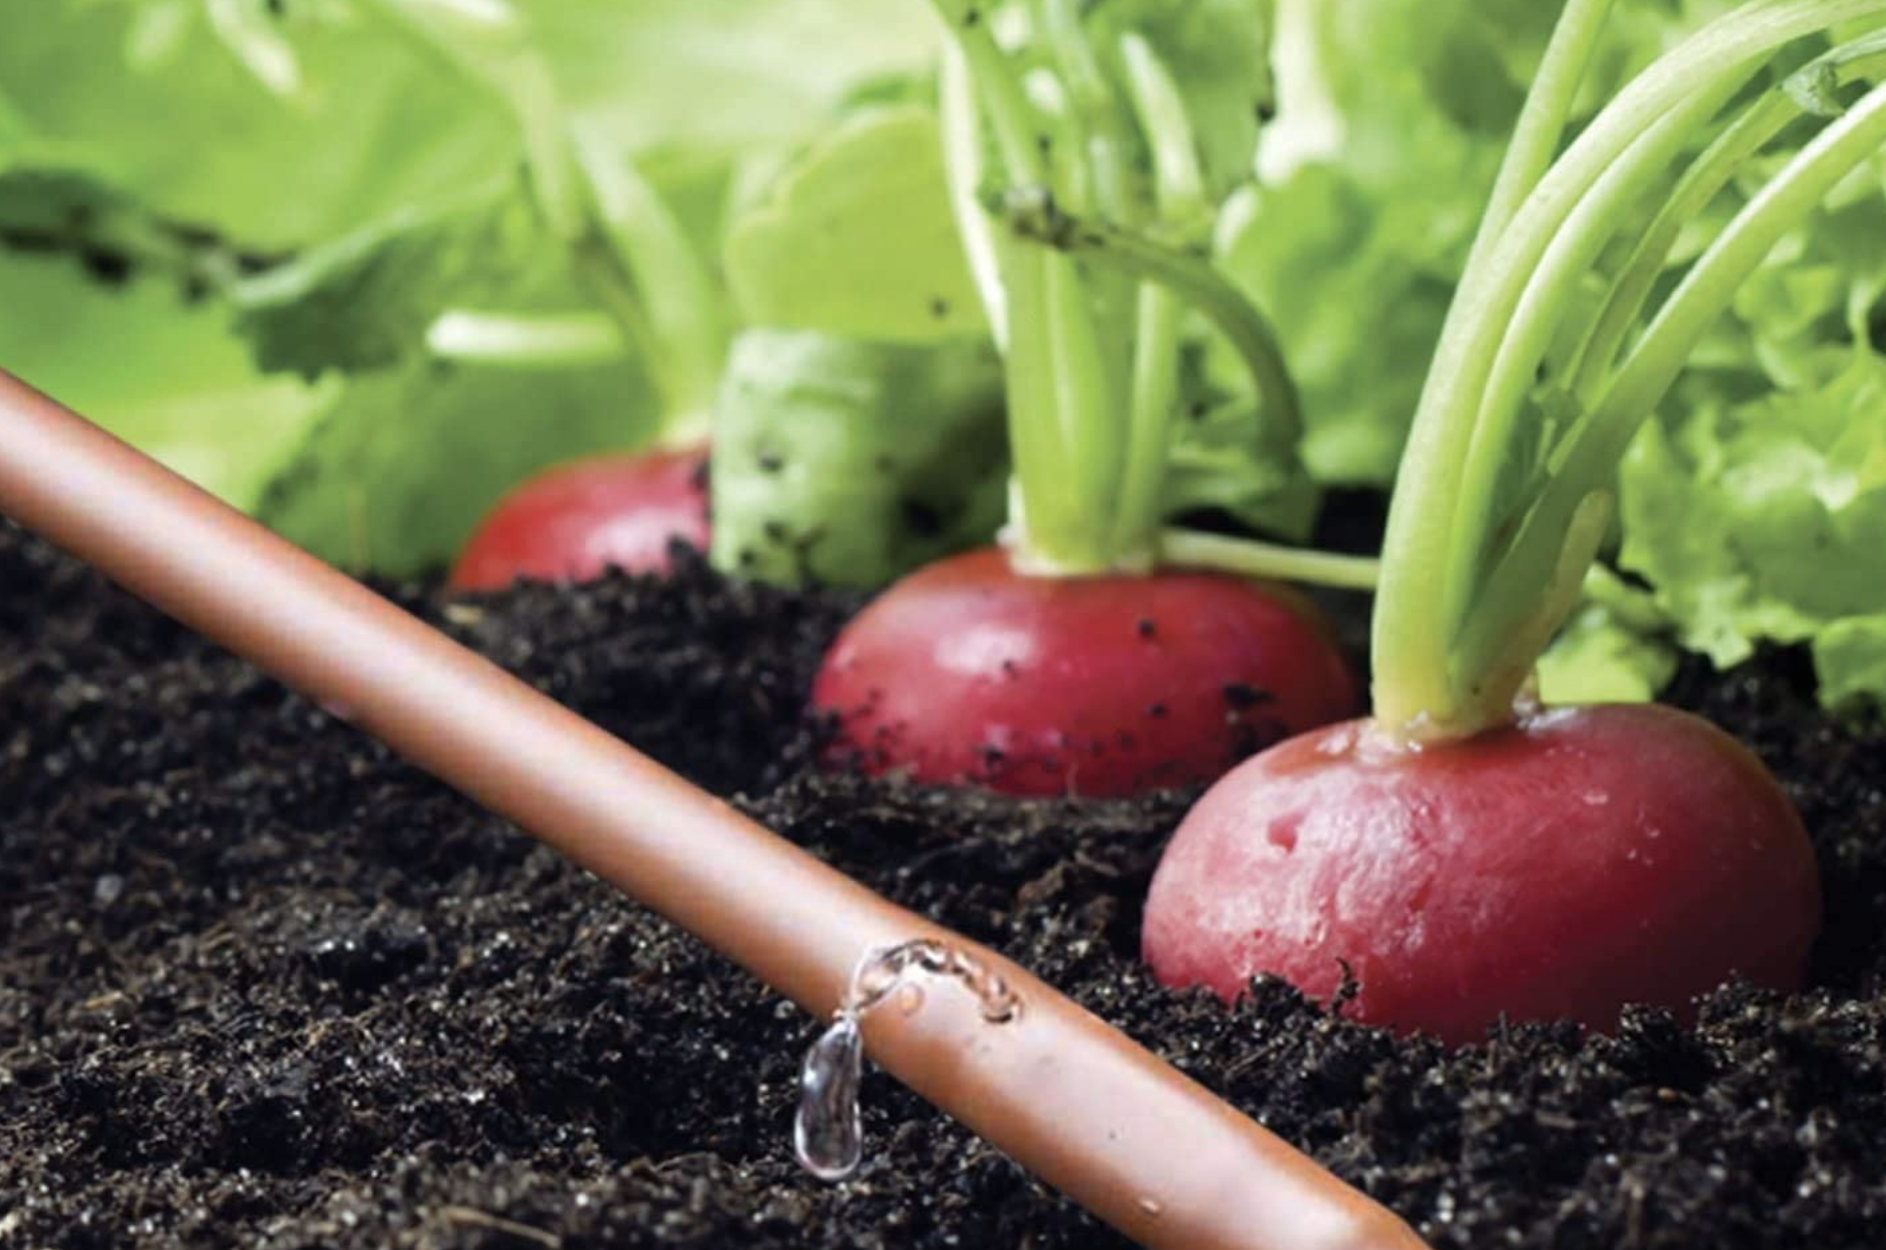 The best drip irrigation systems for outdoor plants